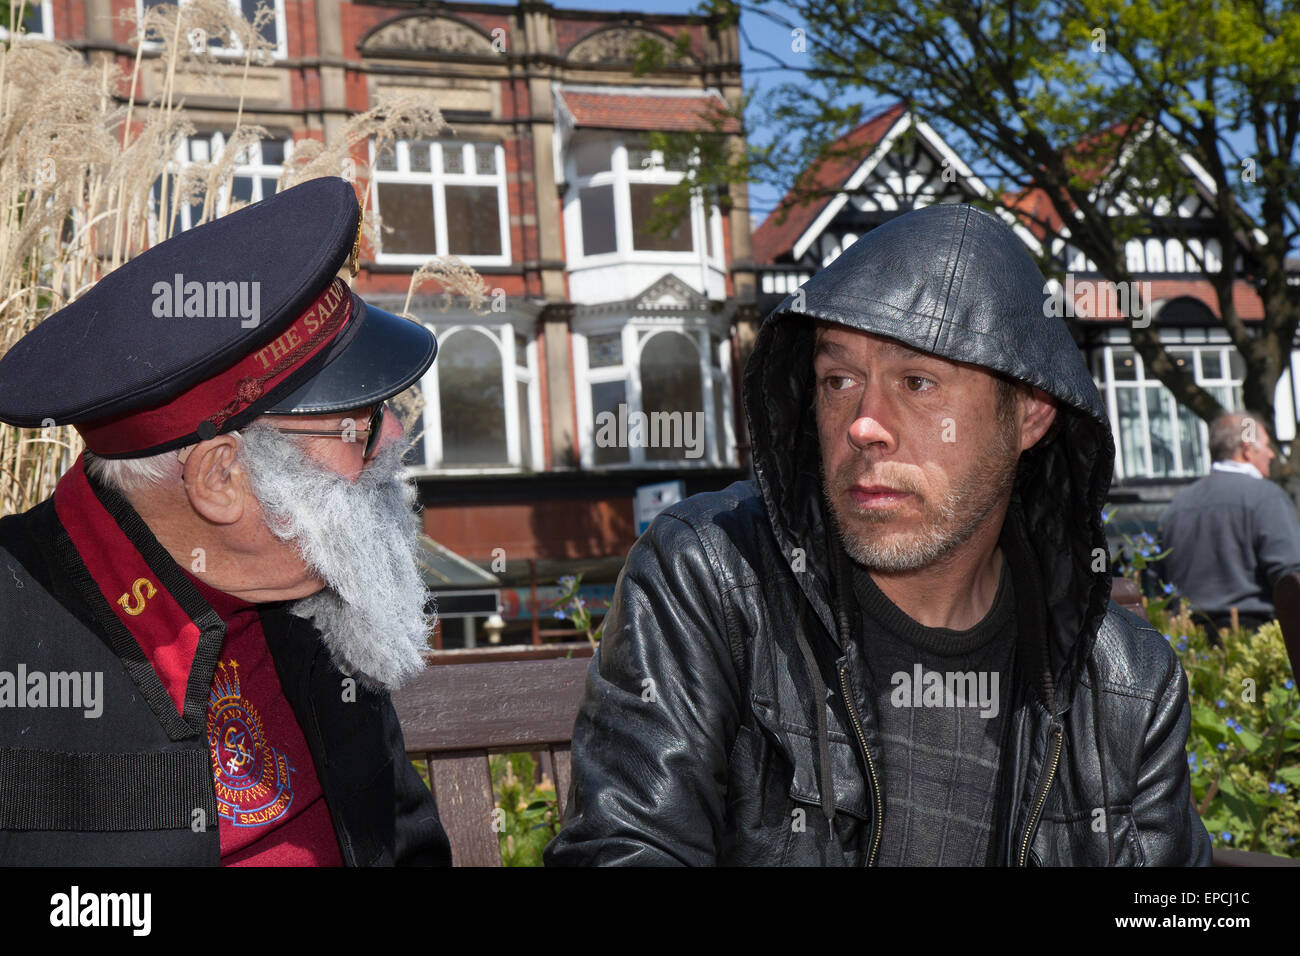 Southport, Merseyside UK, 16th May, 2015. Homeless man Anthony Smith being assisted by Mr Groom.  The Salvation Army Southport corps invited Salvationists and others in fundraising, with a series of events in the town centre including massed choirs and march. Credit:  Mar Photographics/Alamy Live News Stock Photo